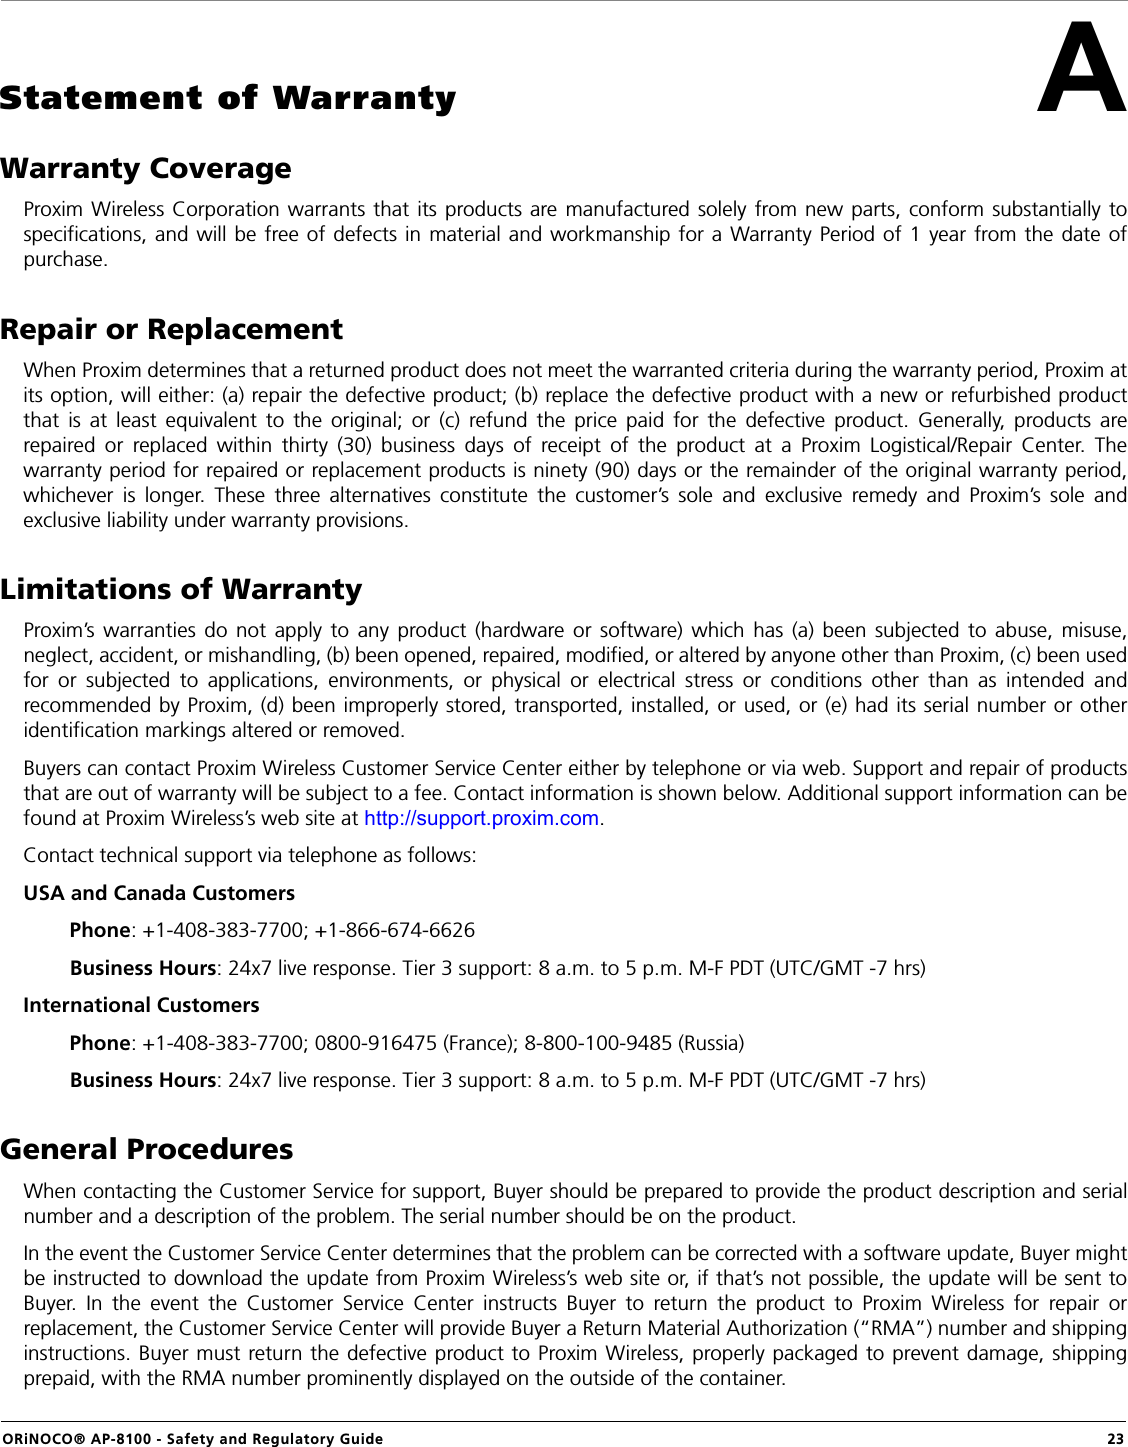 ORiNOCO® AP-8100 - Safety and Regulatory Guide  23AStatement of WarrantyWarranty CoverageProxim Wireless Corporation warrants that its products are manufactured solely from new parts, conform substantially tospecifications, and will be free of defects in material and workmanship for a Warranty Period of 1 year from the date ofpurchase.Repair or ReplacementWhen Proxim determines that a returned product does not meet the warranted criteria during the warranty period, Proxim atits option, will either: (a) repair the defective product; (b) replace the defective product with a new or refurbished productthat is at least equivalent to the original; or (c) refund the price paid for the defective product. Generally, products arerepaired or replaced within thirty (30) business days of receipt of the product at a Proxim Logistical/Repair Center. Thewarranty period for repaired or replacement products is ninety (90) days or the remainder of the original warranty period,whichever is longer. These three alternatives constitute the customer’s sole and exclusive remedy and Proxim’s sole andexclusive liability under warranty provisions.Limitations of WarrantyProxim’s warranties do not apply to any product (hardware or software) which has (a) been subjected to abuse, misuse,neglect, accident, or mishandling, (b) been opened, repaired, modified, or altered by anyone other than Proxim, (c) been usedfor or subjected to applications, environments, or physical or electrical stress or conditions other than as intended andrecommended by Proxim, (d) been improperly stored, transported, installed, or used, or (e) had its serial number or otheridentification markings altered or removed.Buyers can contact Proxim Wireless Customer Service Center either by telephone or via web. Support and repair of productsthat are out of warranty will be subject to a fee. Contact information is shown below. Additional support information can befound at Proxim Wireless’s web site at http://support.proxim.com.Contact technical support via telephone as follows:USA and Canada Customers         Phone: +1-408-383-7700; +1-866-674-6626        Business Hours: 24x7 live response. Tier 3 support: 8 a.m. to 5 p.m. M-F PDT (UTC/GMT -7 hrs)International Customers         Phone: +1-408-383-7700; 0800-916475 (France); 8-800-100-9485 (Russia)        Business Hours: 24x7 live response. Tier 3 support: 8 a.m. to 5 p.m. M-F PDT (UTC/GMT -7 hrs)General ProceduresWhen contacting the Customer Service for support, Buyer should be prepared to provide the product description and serialnumber and a description of the problem. The serial number should be on the product. In the event the Customer Service Center determines that the problem can be corrected with a software update, Buyer mightbe instructed to download the update from Proxim Wireless’s web site or, if that’s not possible, the update will be sent toBuyer. In the event the Customer Service Center instructs Buyer to return the product to Proxim Wireless for repair orreplacement, the Customer Service Center will provide Buyer a Return Material Authorization (“RMA”) number and shippinginstructions. Buyer must return the defective product to Proxim Wireless, properly packaged to prevent damage, shippingprepaid, with the RMA number prominently displayed on the outside of the container.